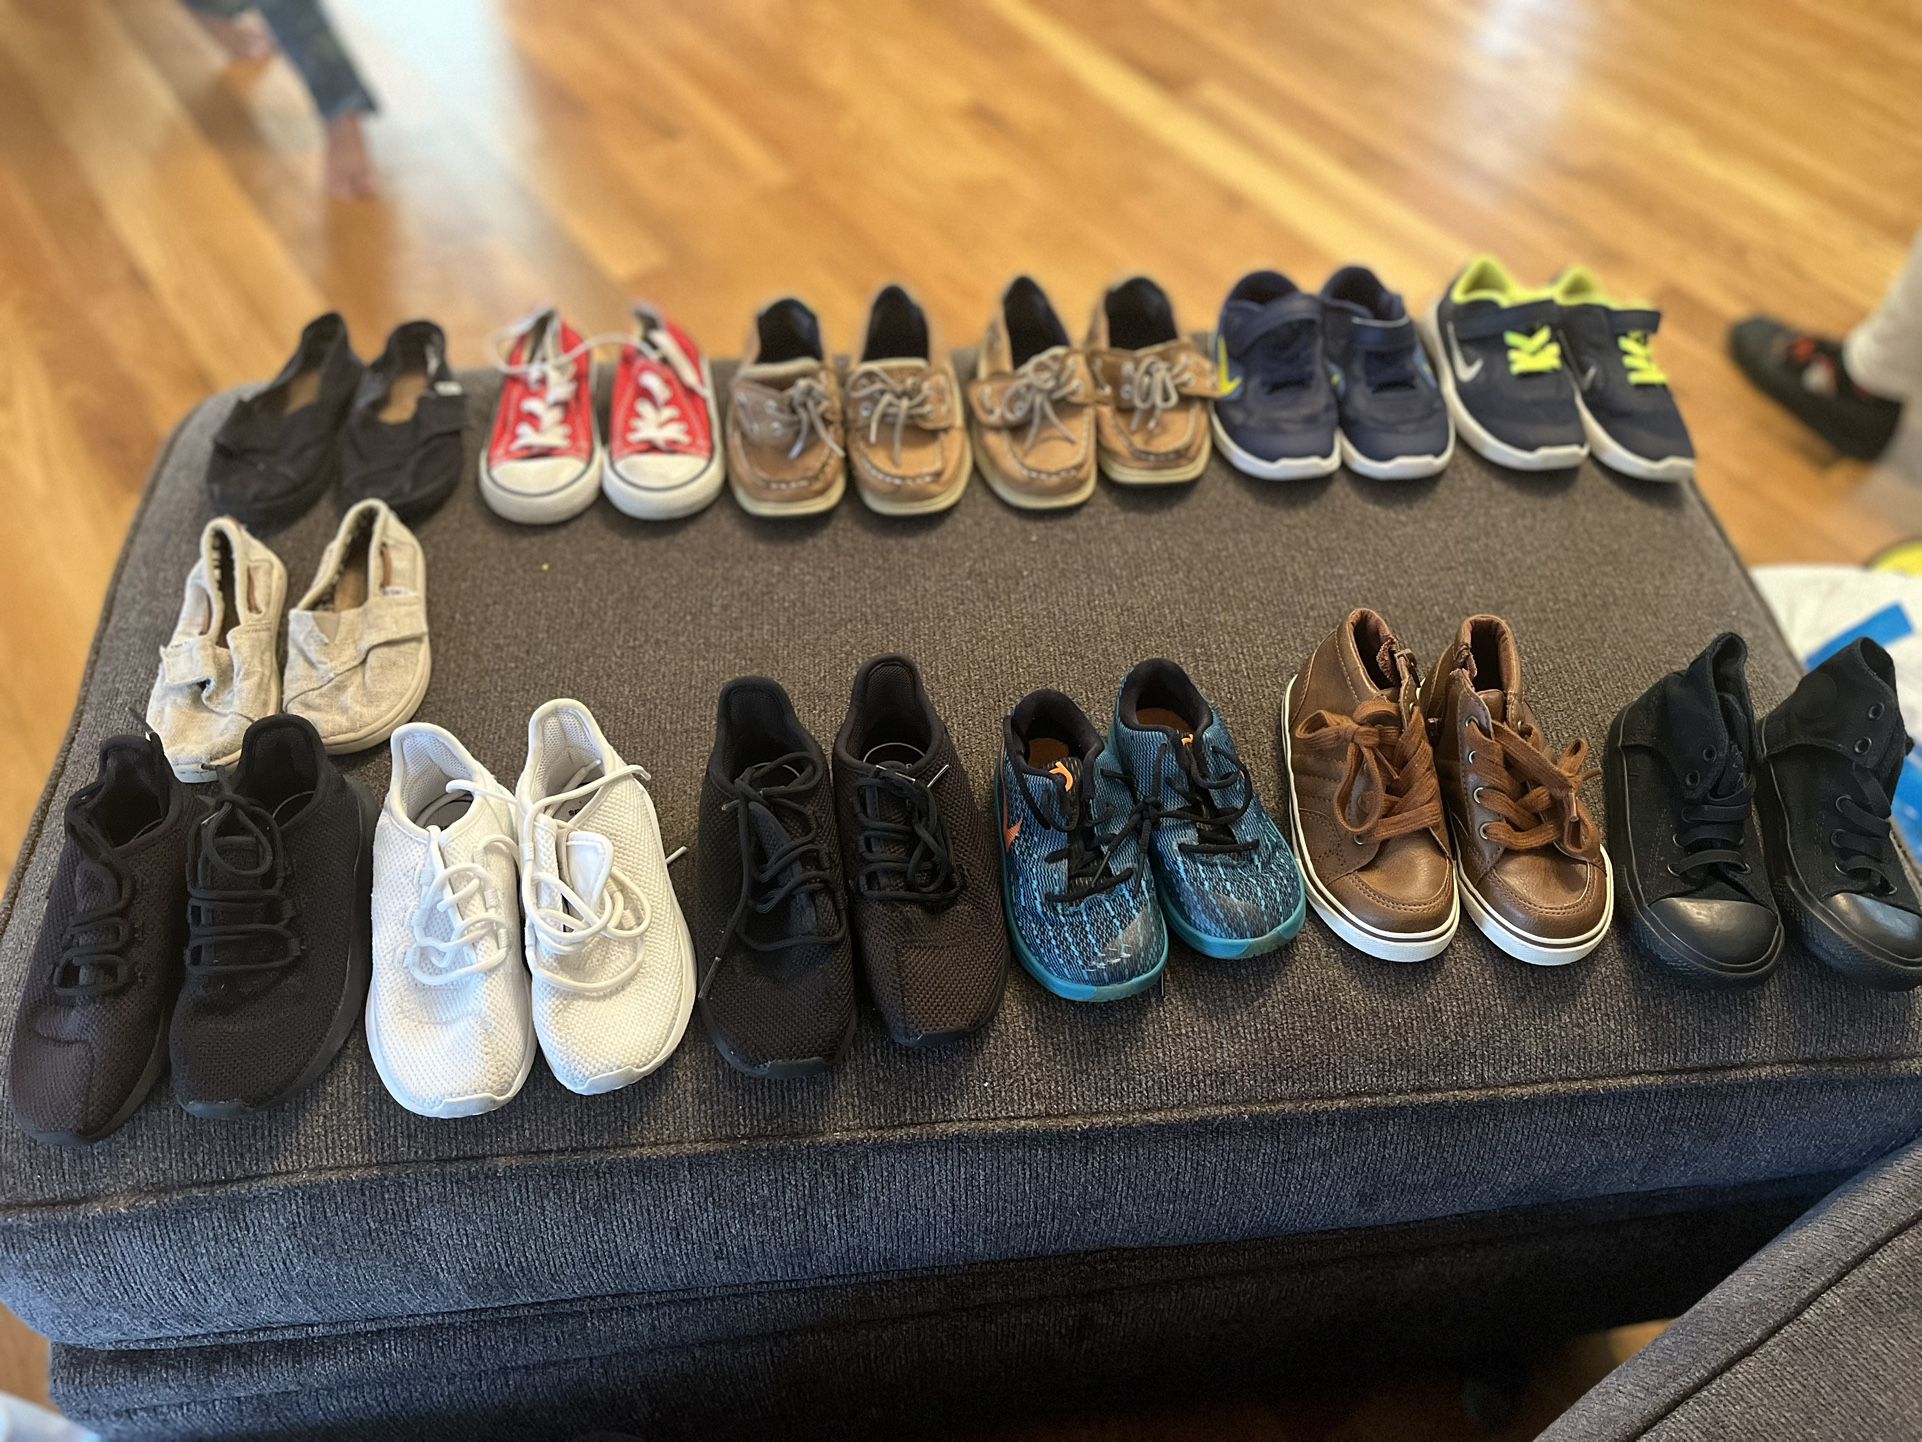 Shoes (Adidas, Converses, Toms, Sperrys, Nikes)